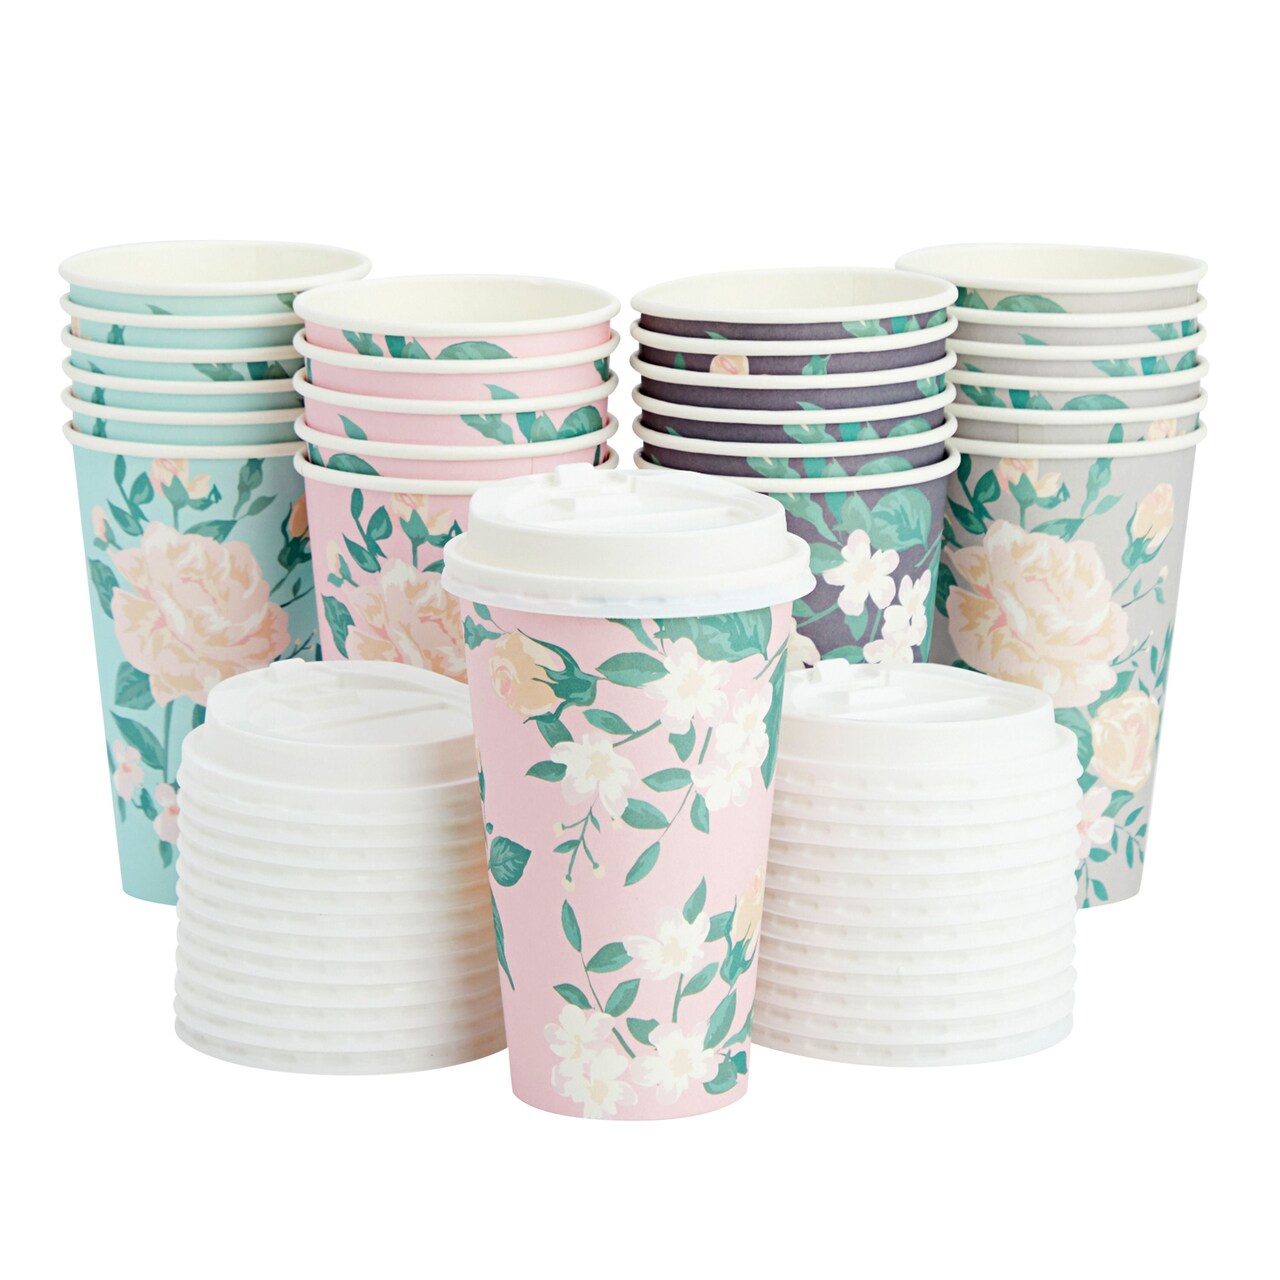 24 Pack 16oz To Go Coffee Cups with Lids, Vintage Floral Design Paper  (Pastel Colors, 4 Designs)